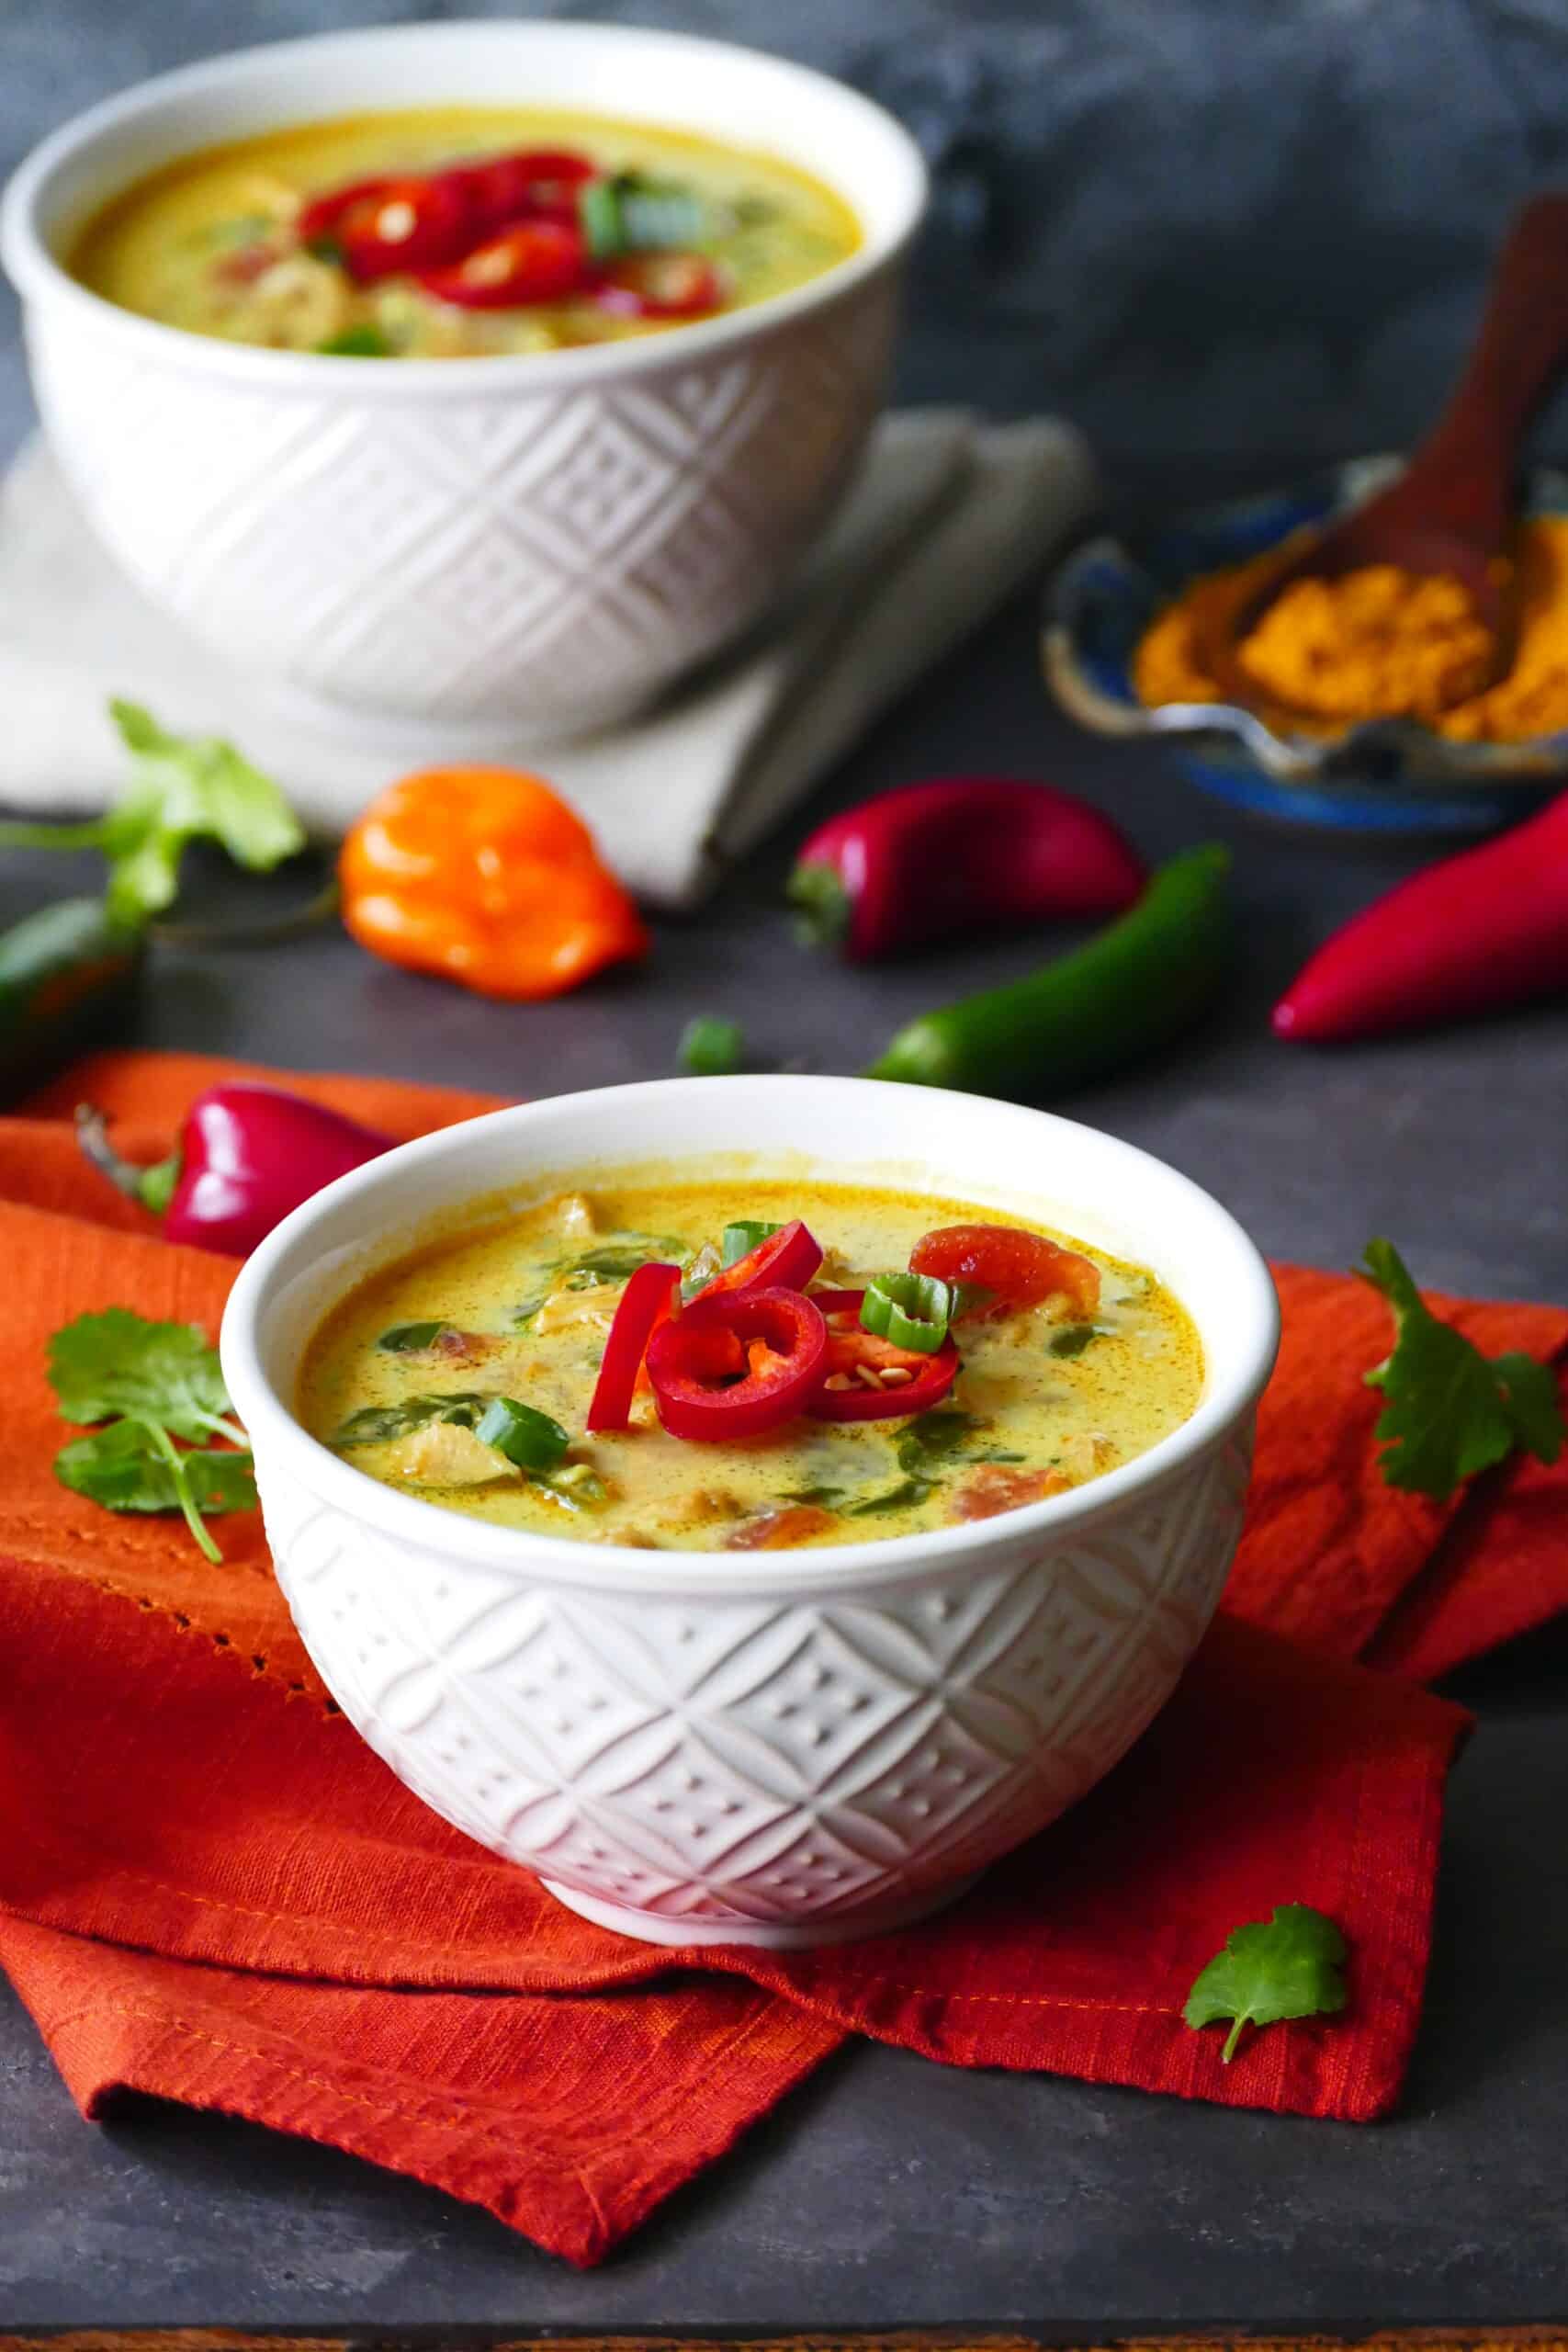 Chicken curry soup - Two white bowls of yellow colored soup garnished with red jalapenos and green onions on an orange napkin